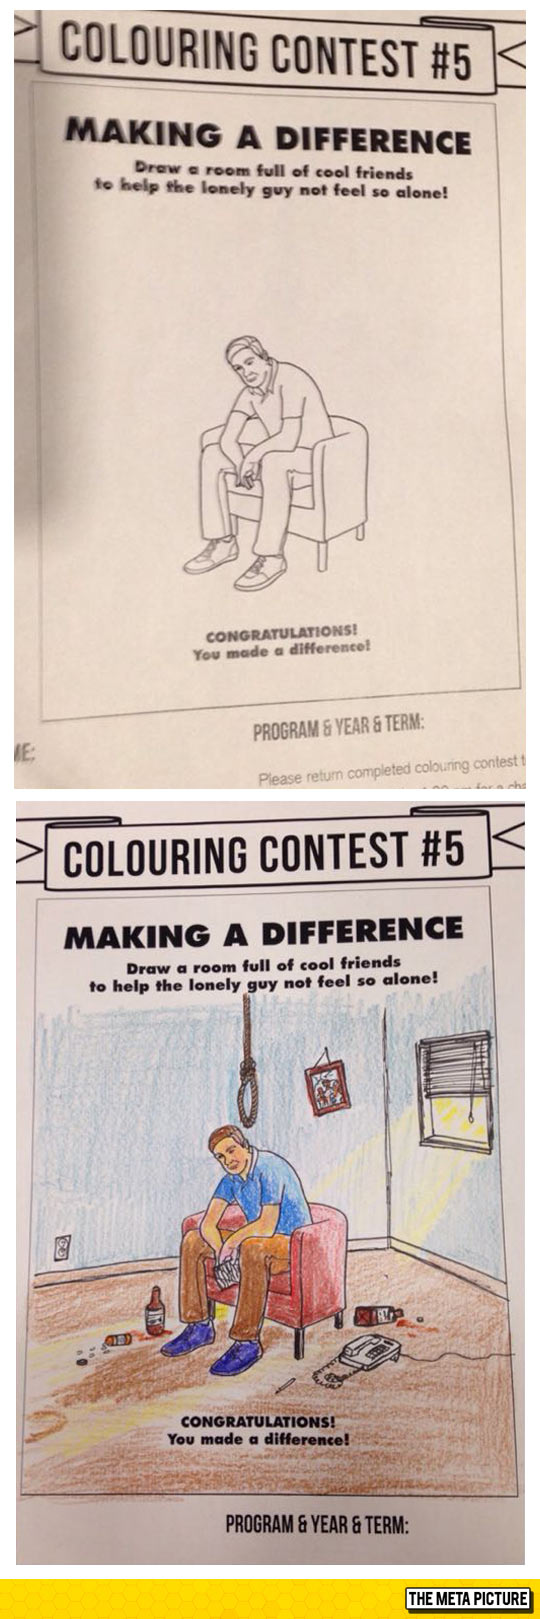 The Coloring Contest